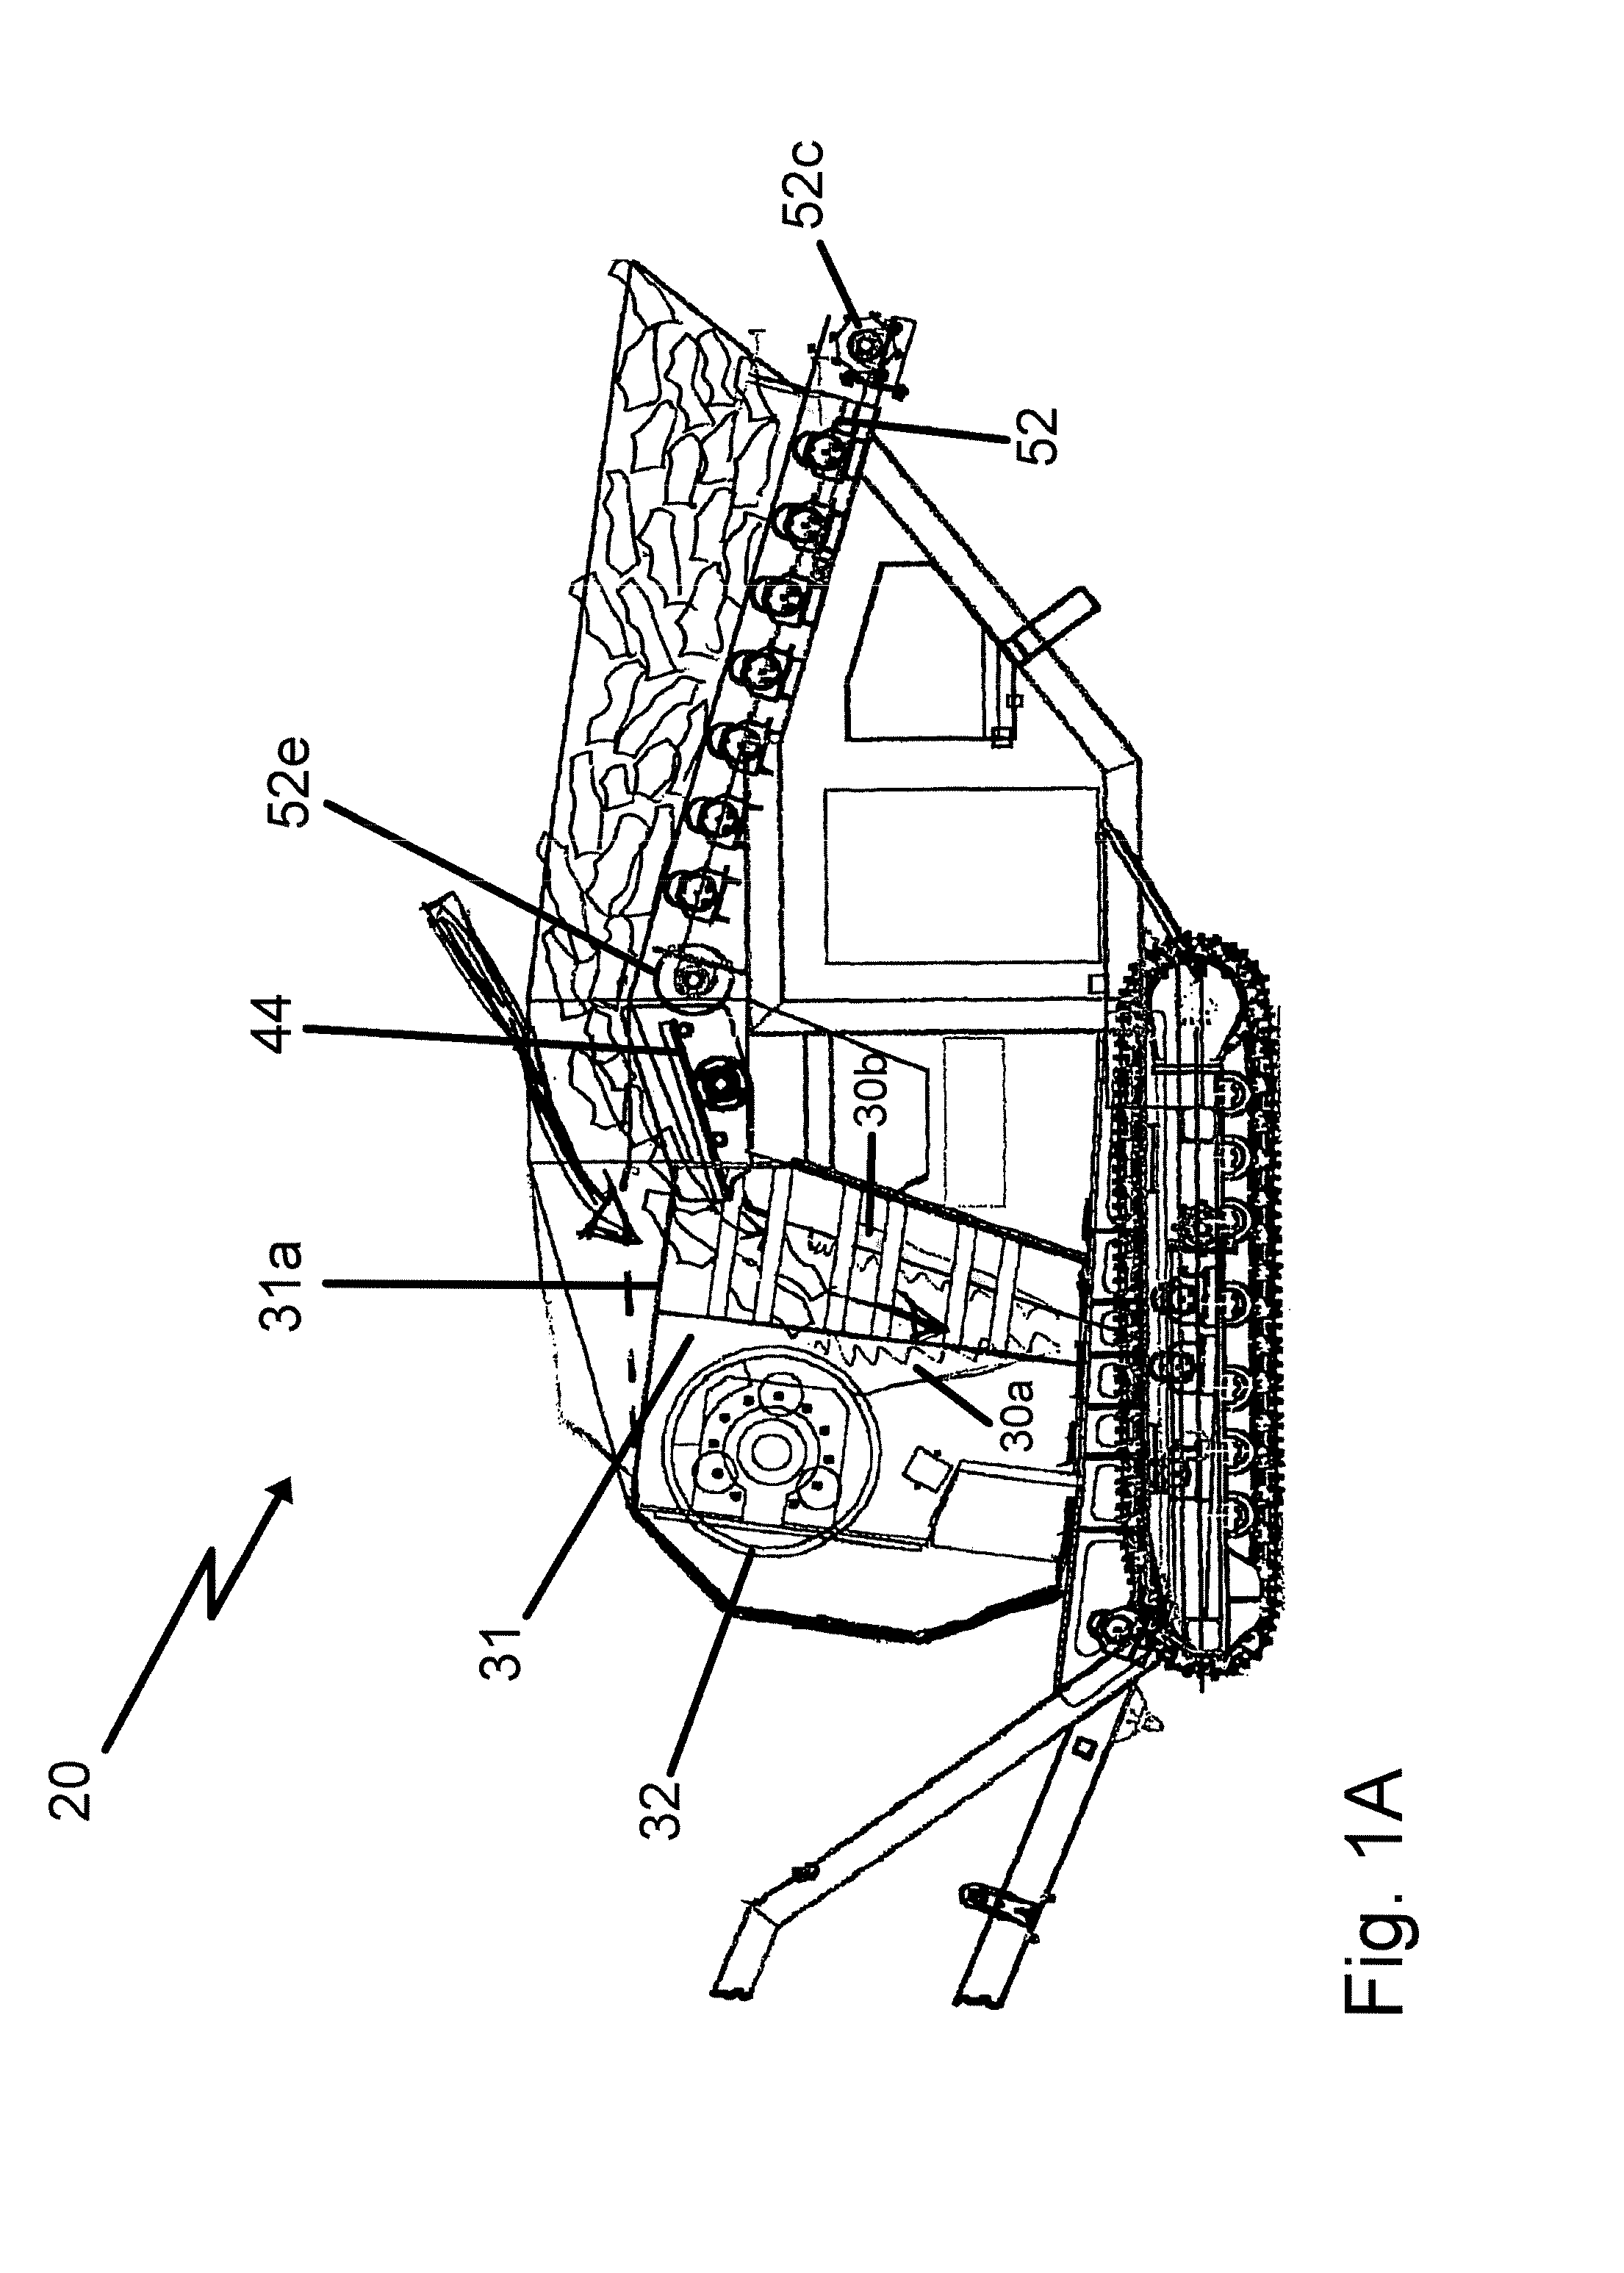 Compact mobile crushing and screening apparatus